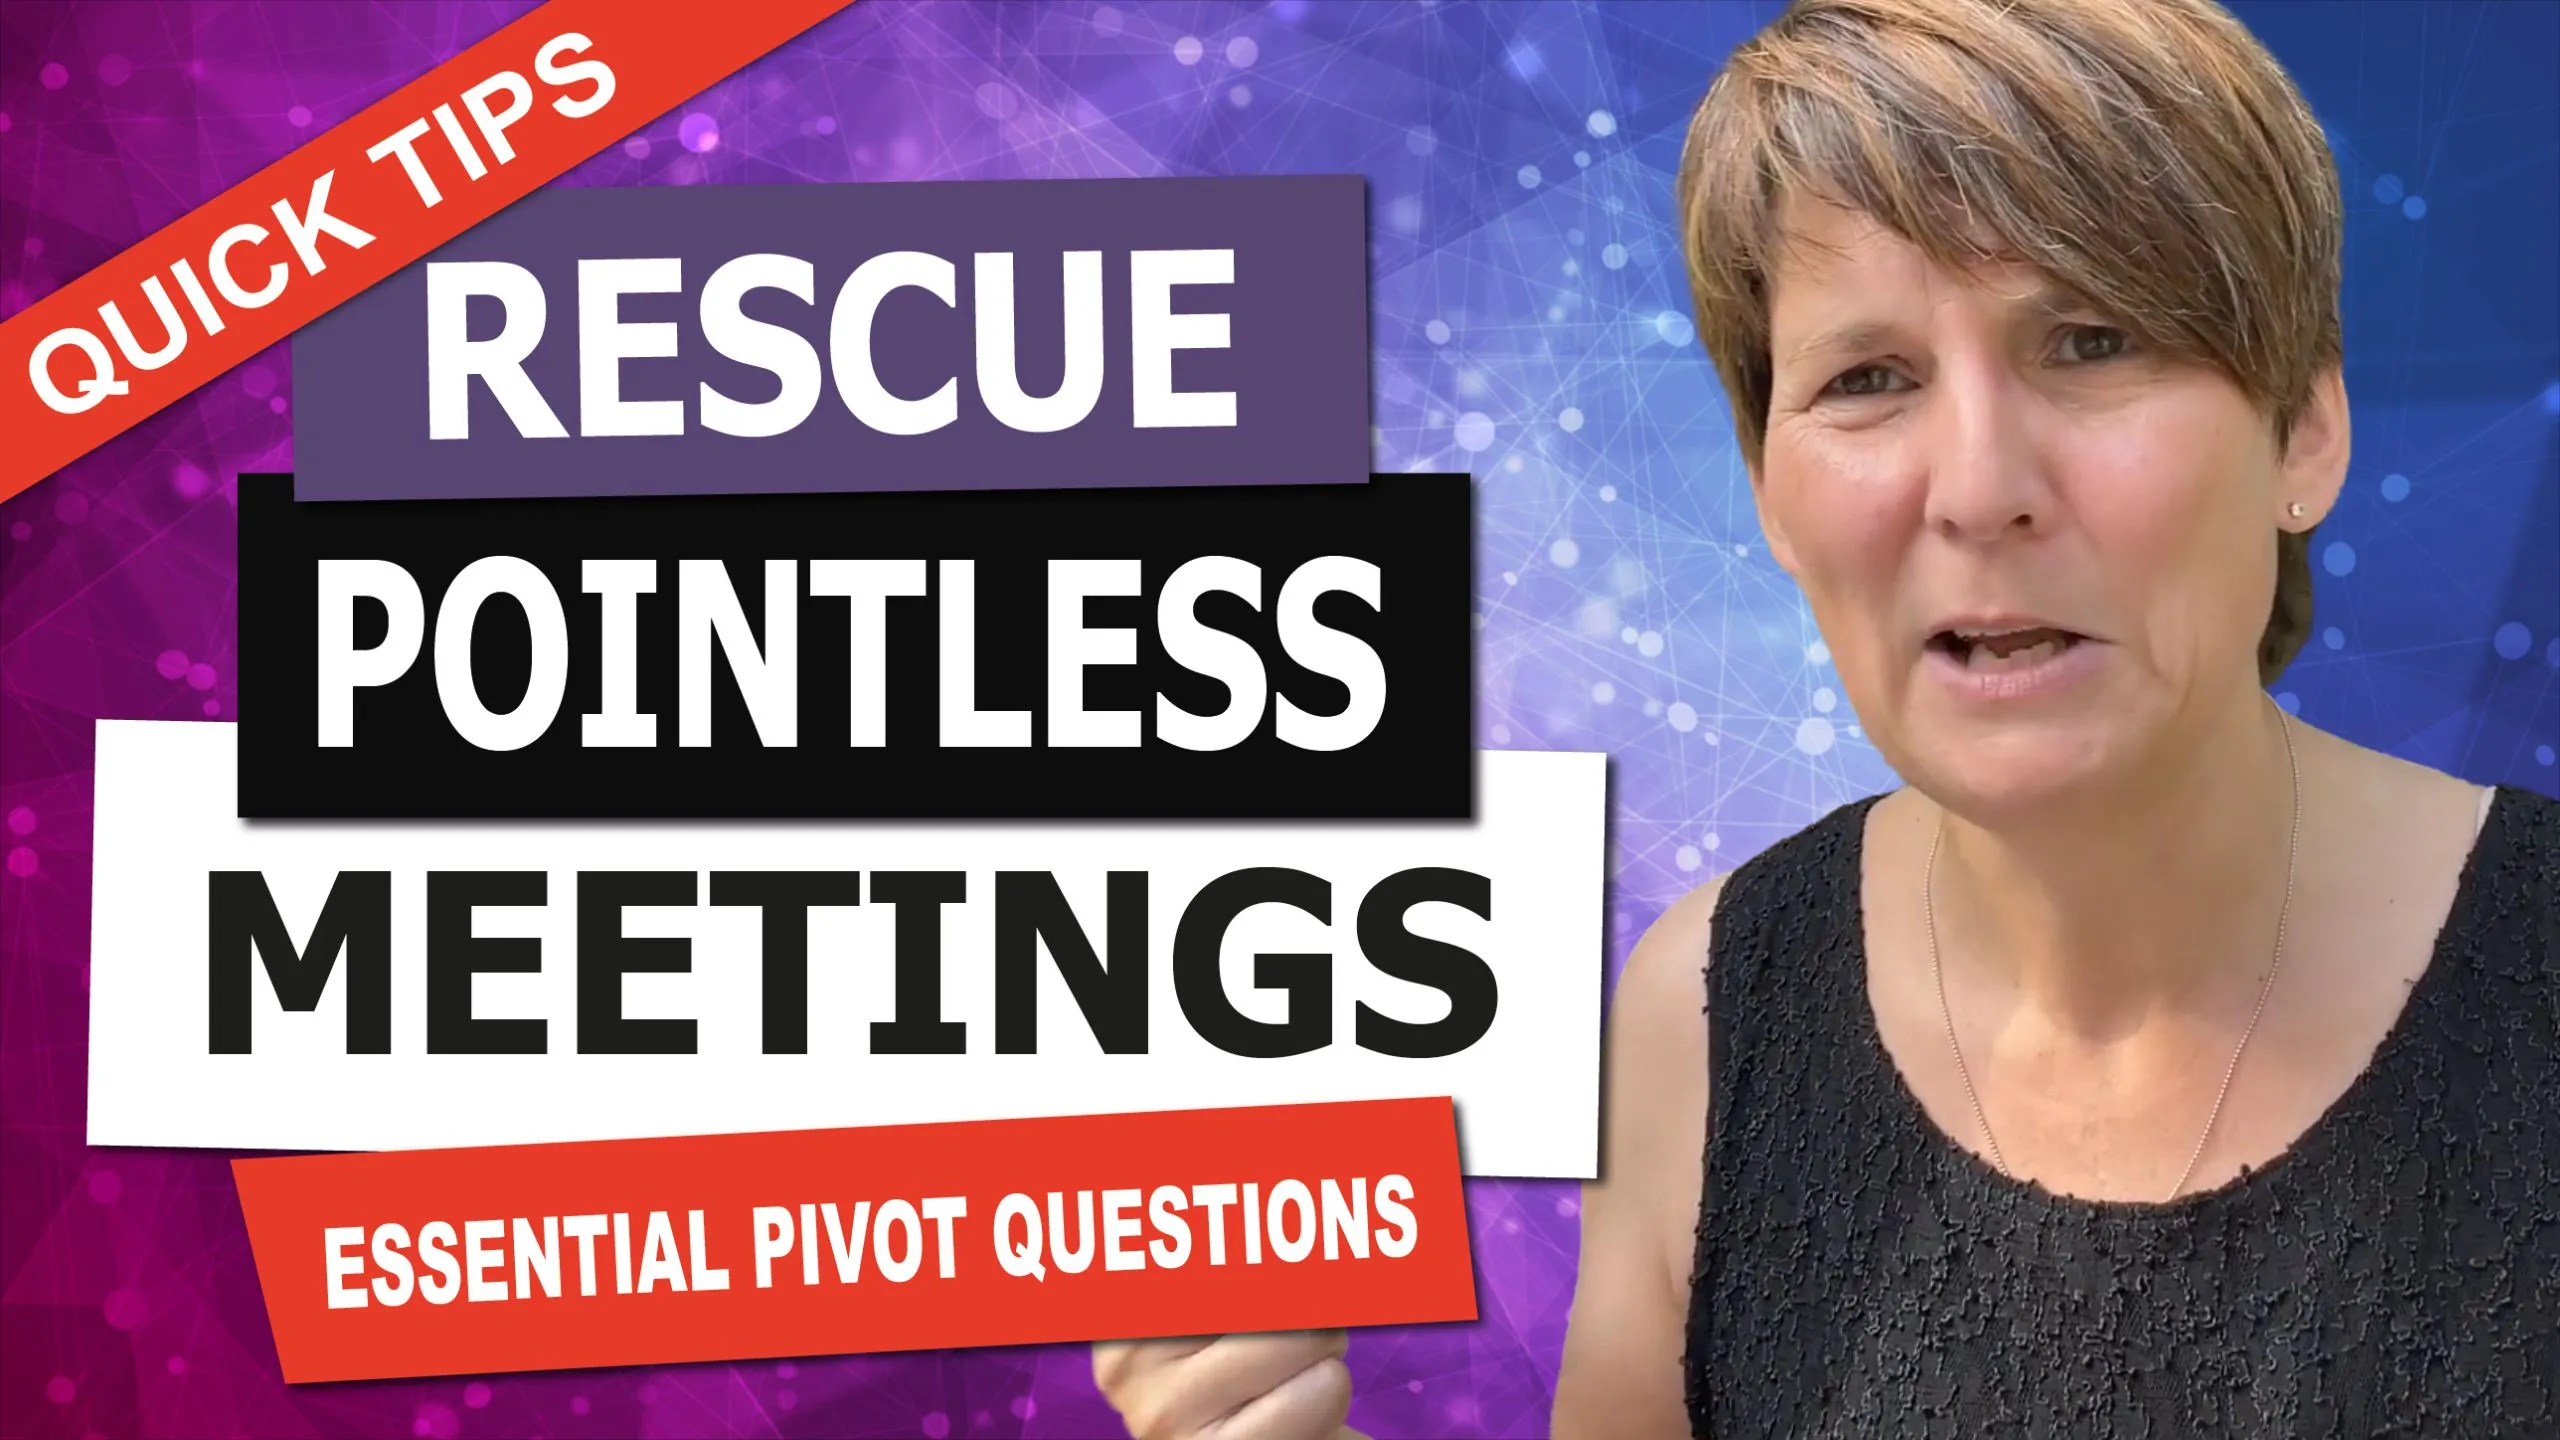 Rescue Pointless Meetings with Liane Davey